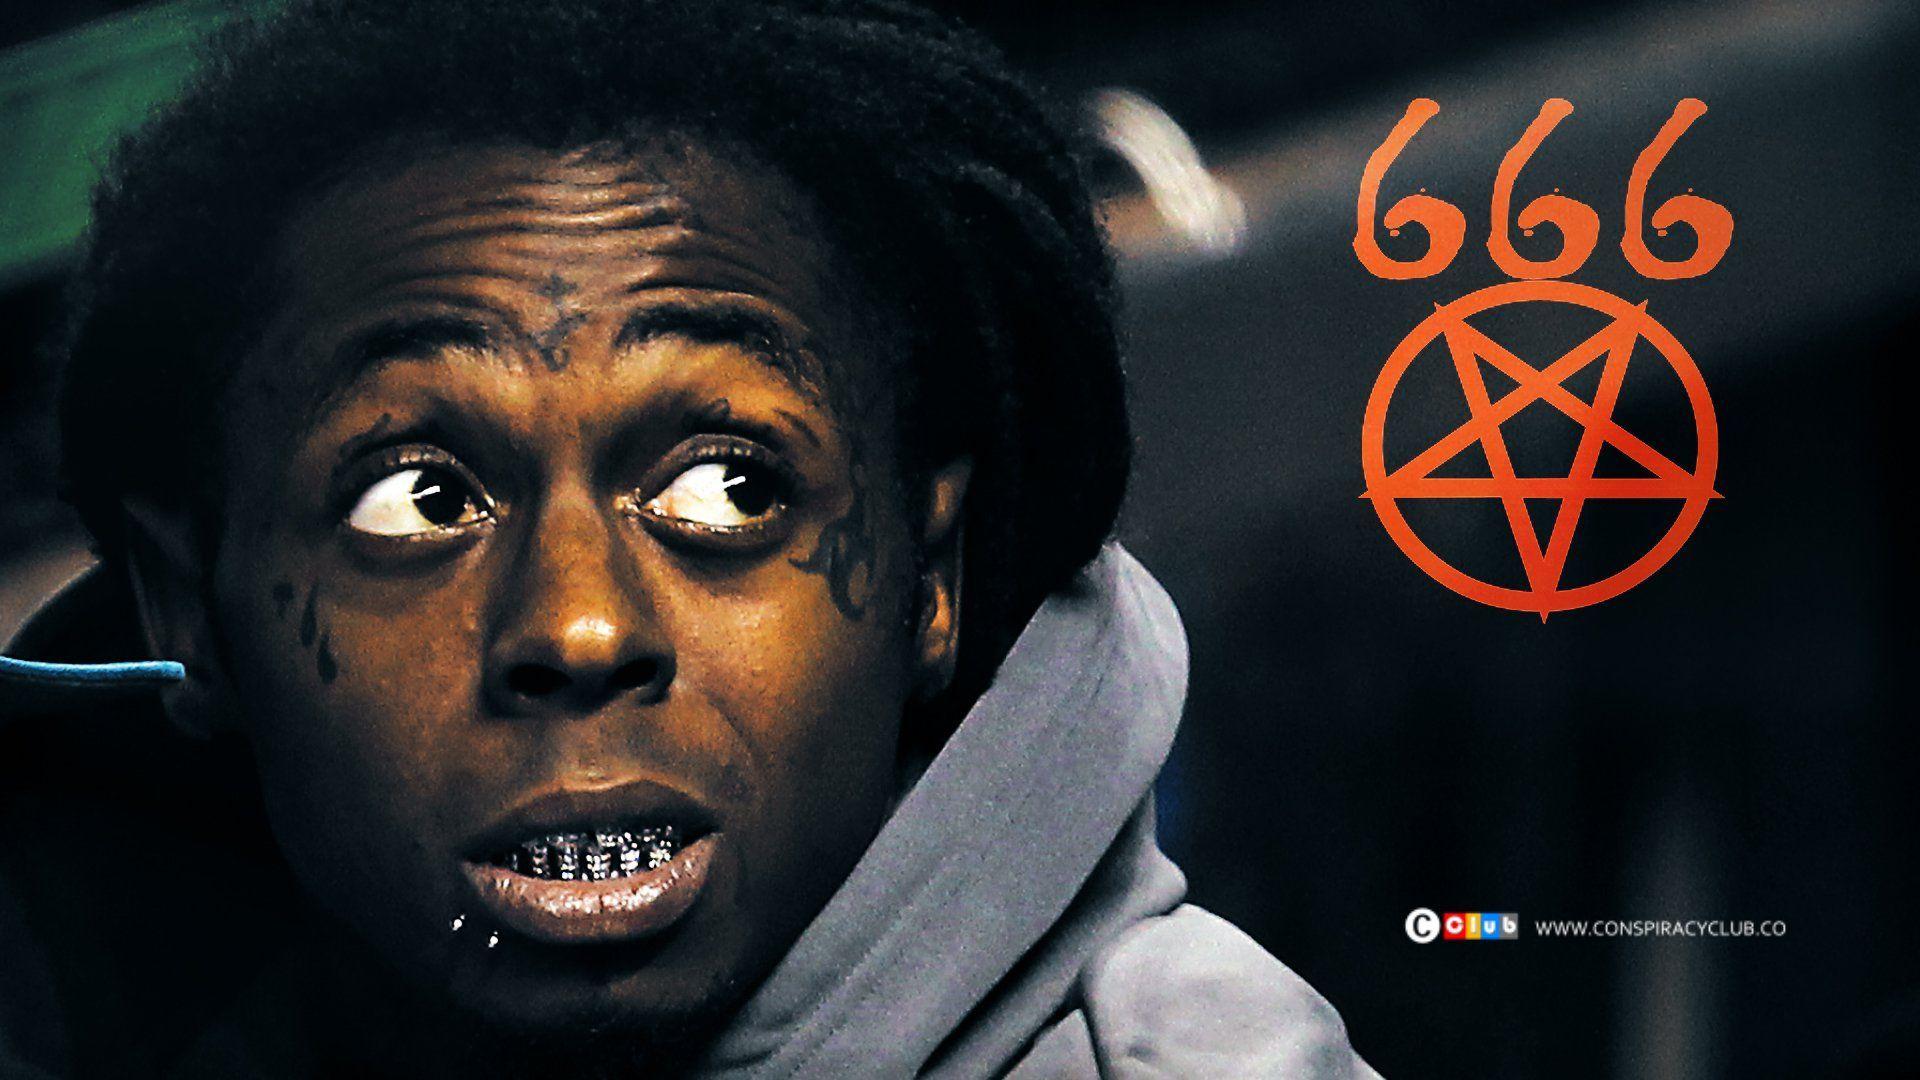 Lil Wayne Says The Illuminati is Changing The World for The Mark